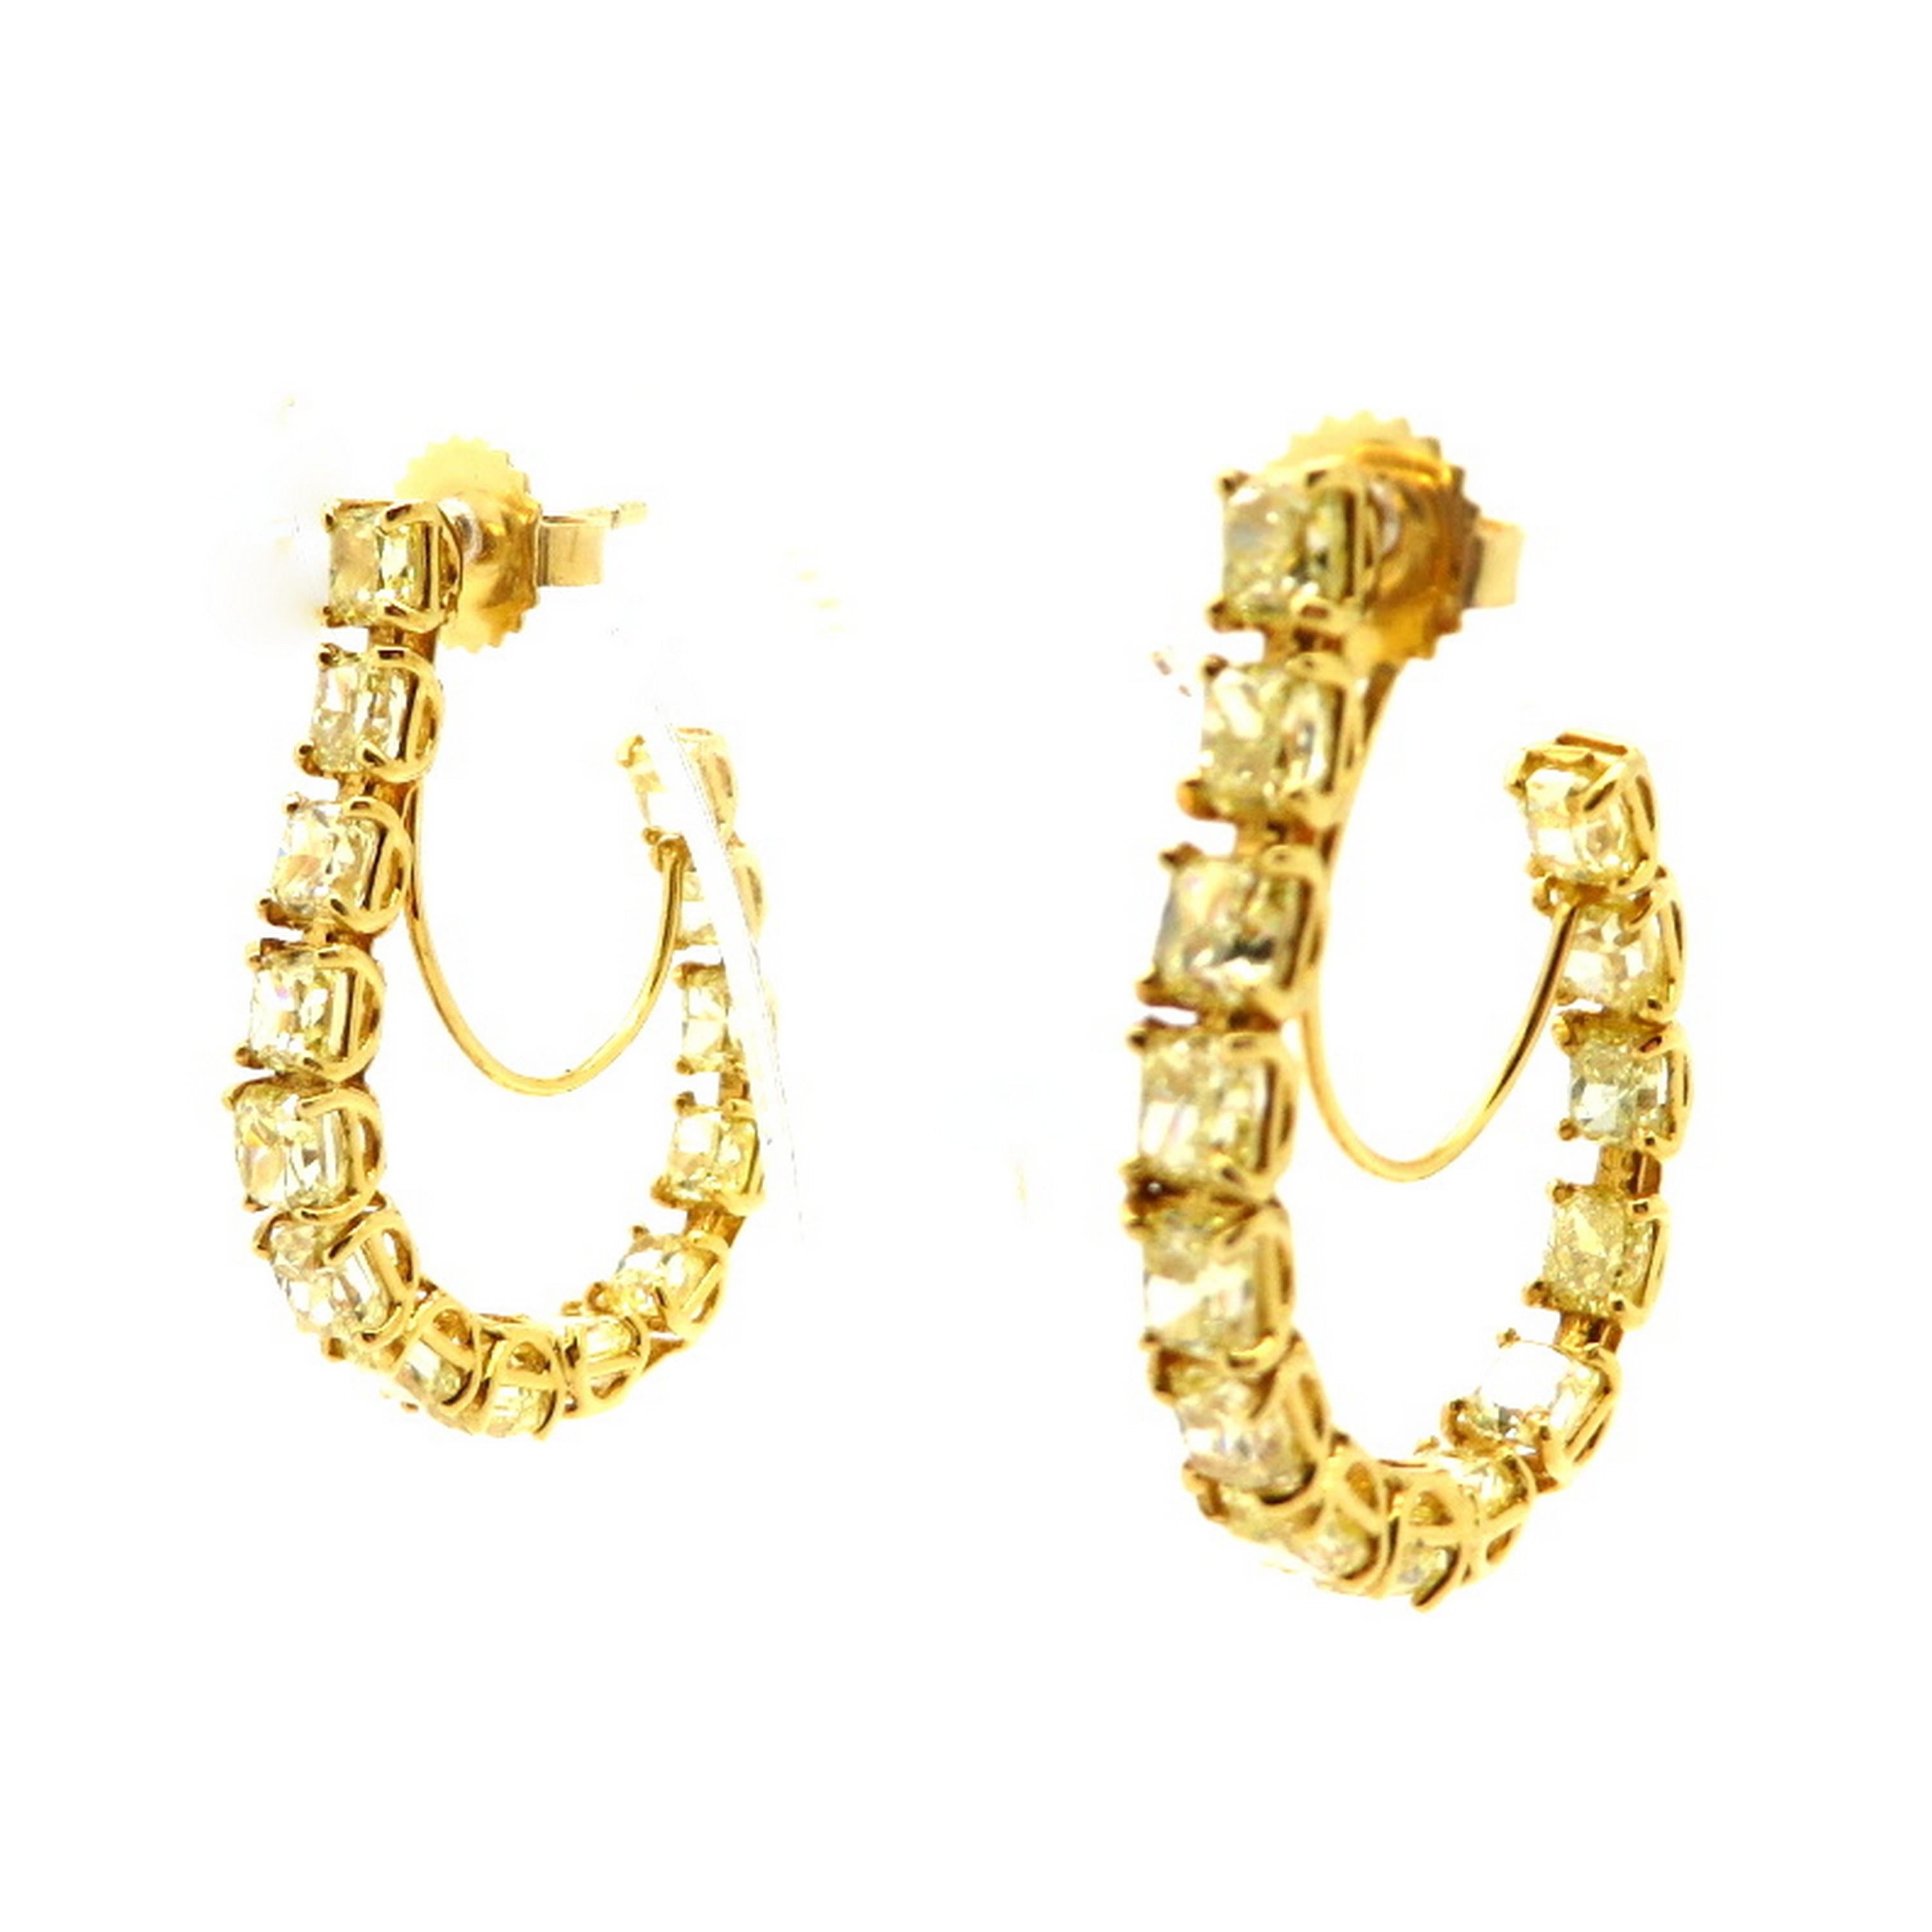 Estate 8.27 carat fancy yellow radiant cut 18K yellow gold diamond hoop earrings. Featuring 28 radiant cut fancy yellow diamonds, each four prong basket set, with various measurements, weighing a combined total of approximately 8.27 carats. Diamond